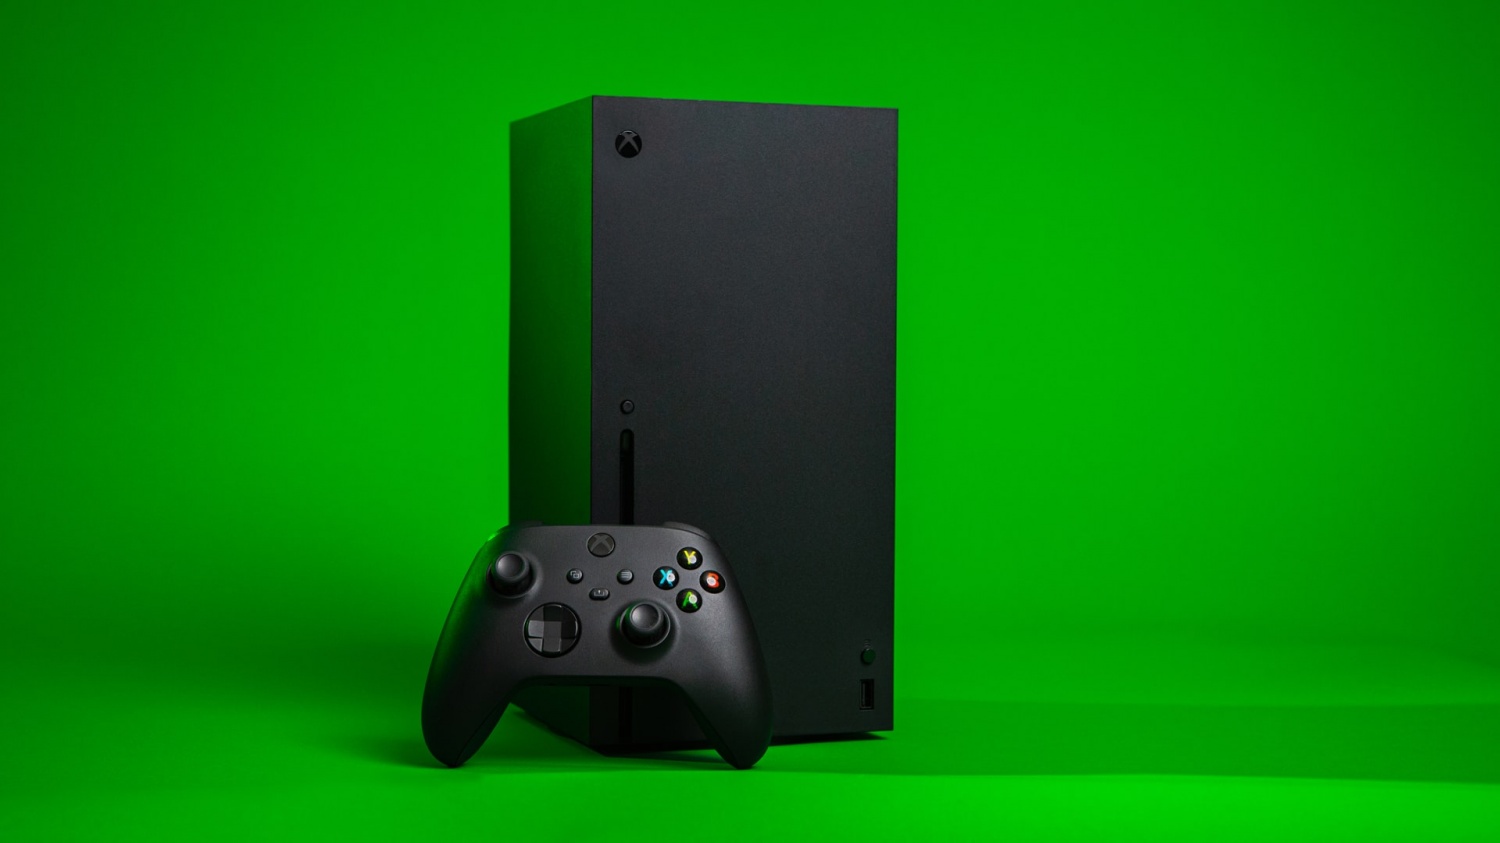 Here's how $10 million in Xbox gift cards stolen by Microsoft employee